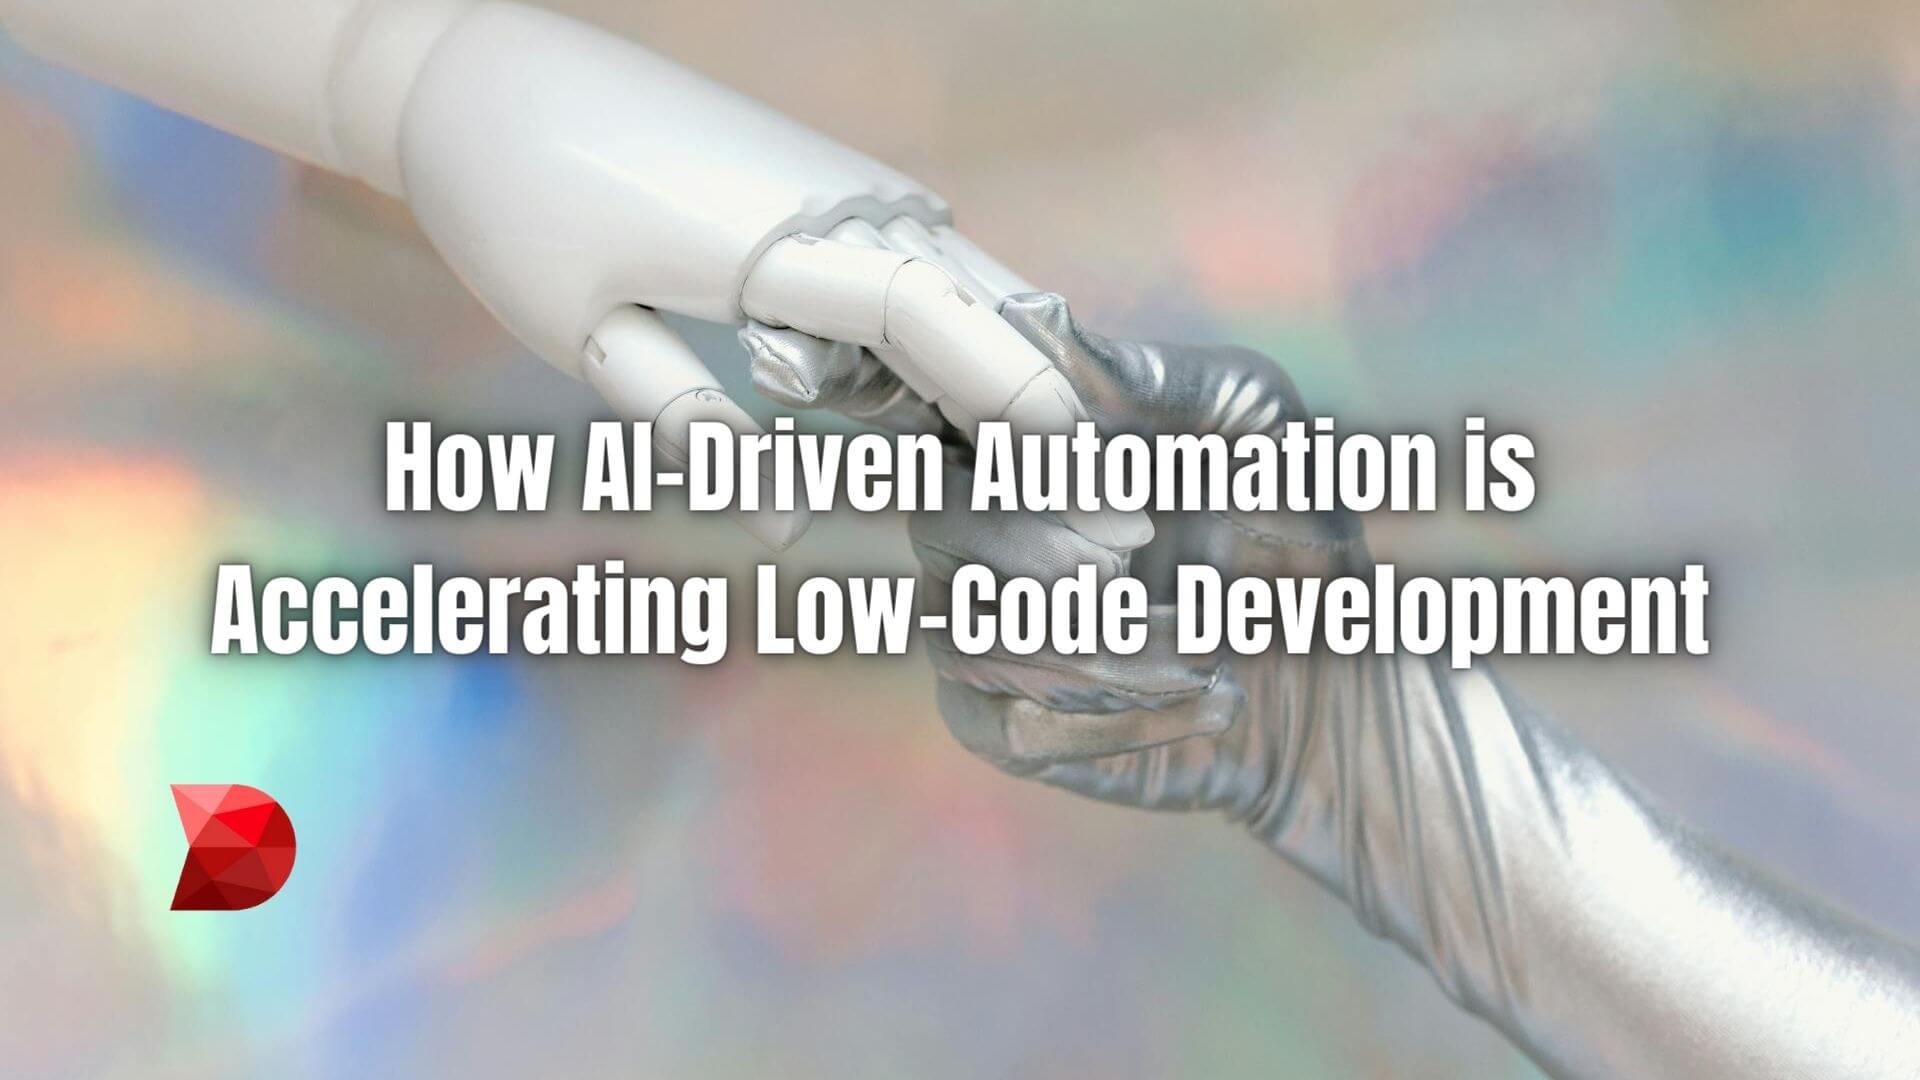 Empower your low-code journey with AI-driven automation! Click here to explore our guide for tips on accelerating development projects.